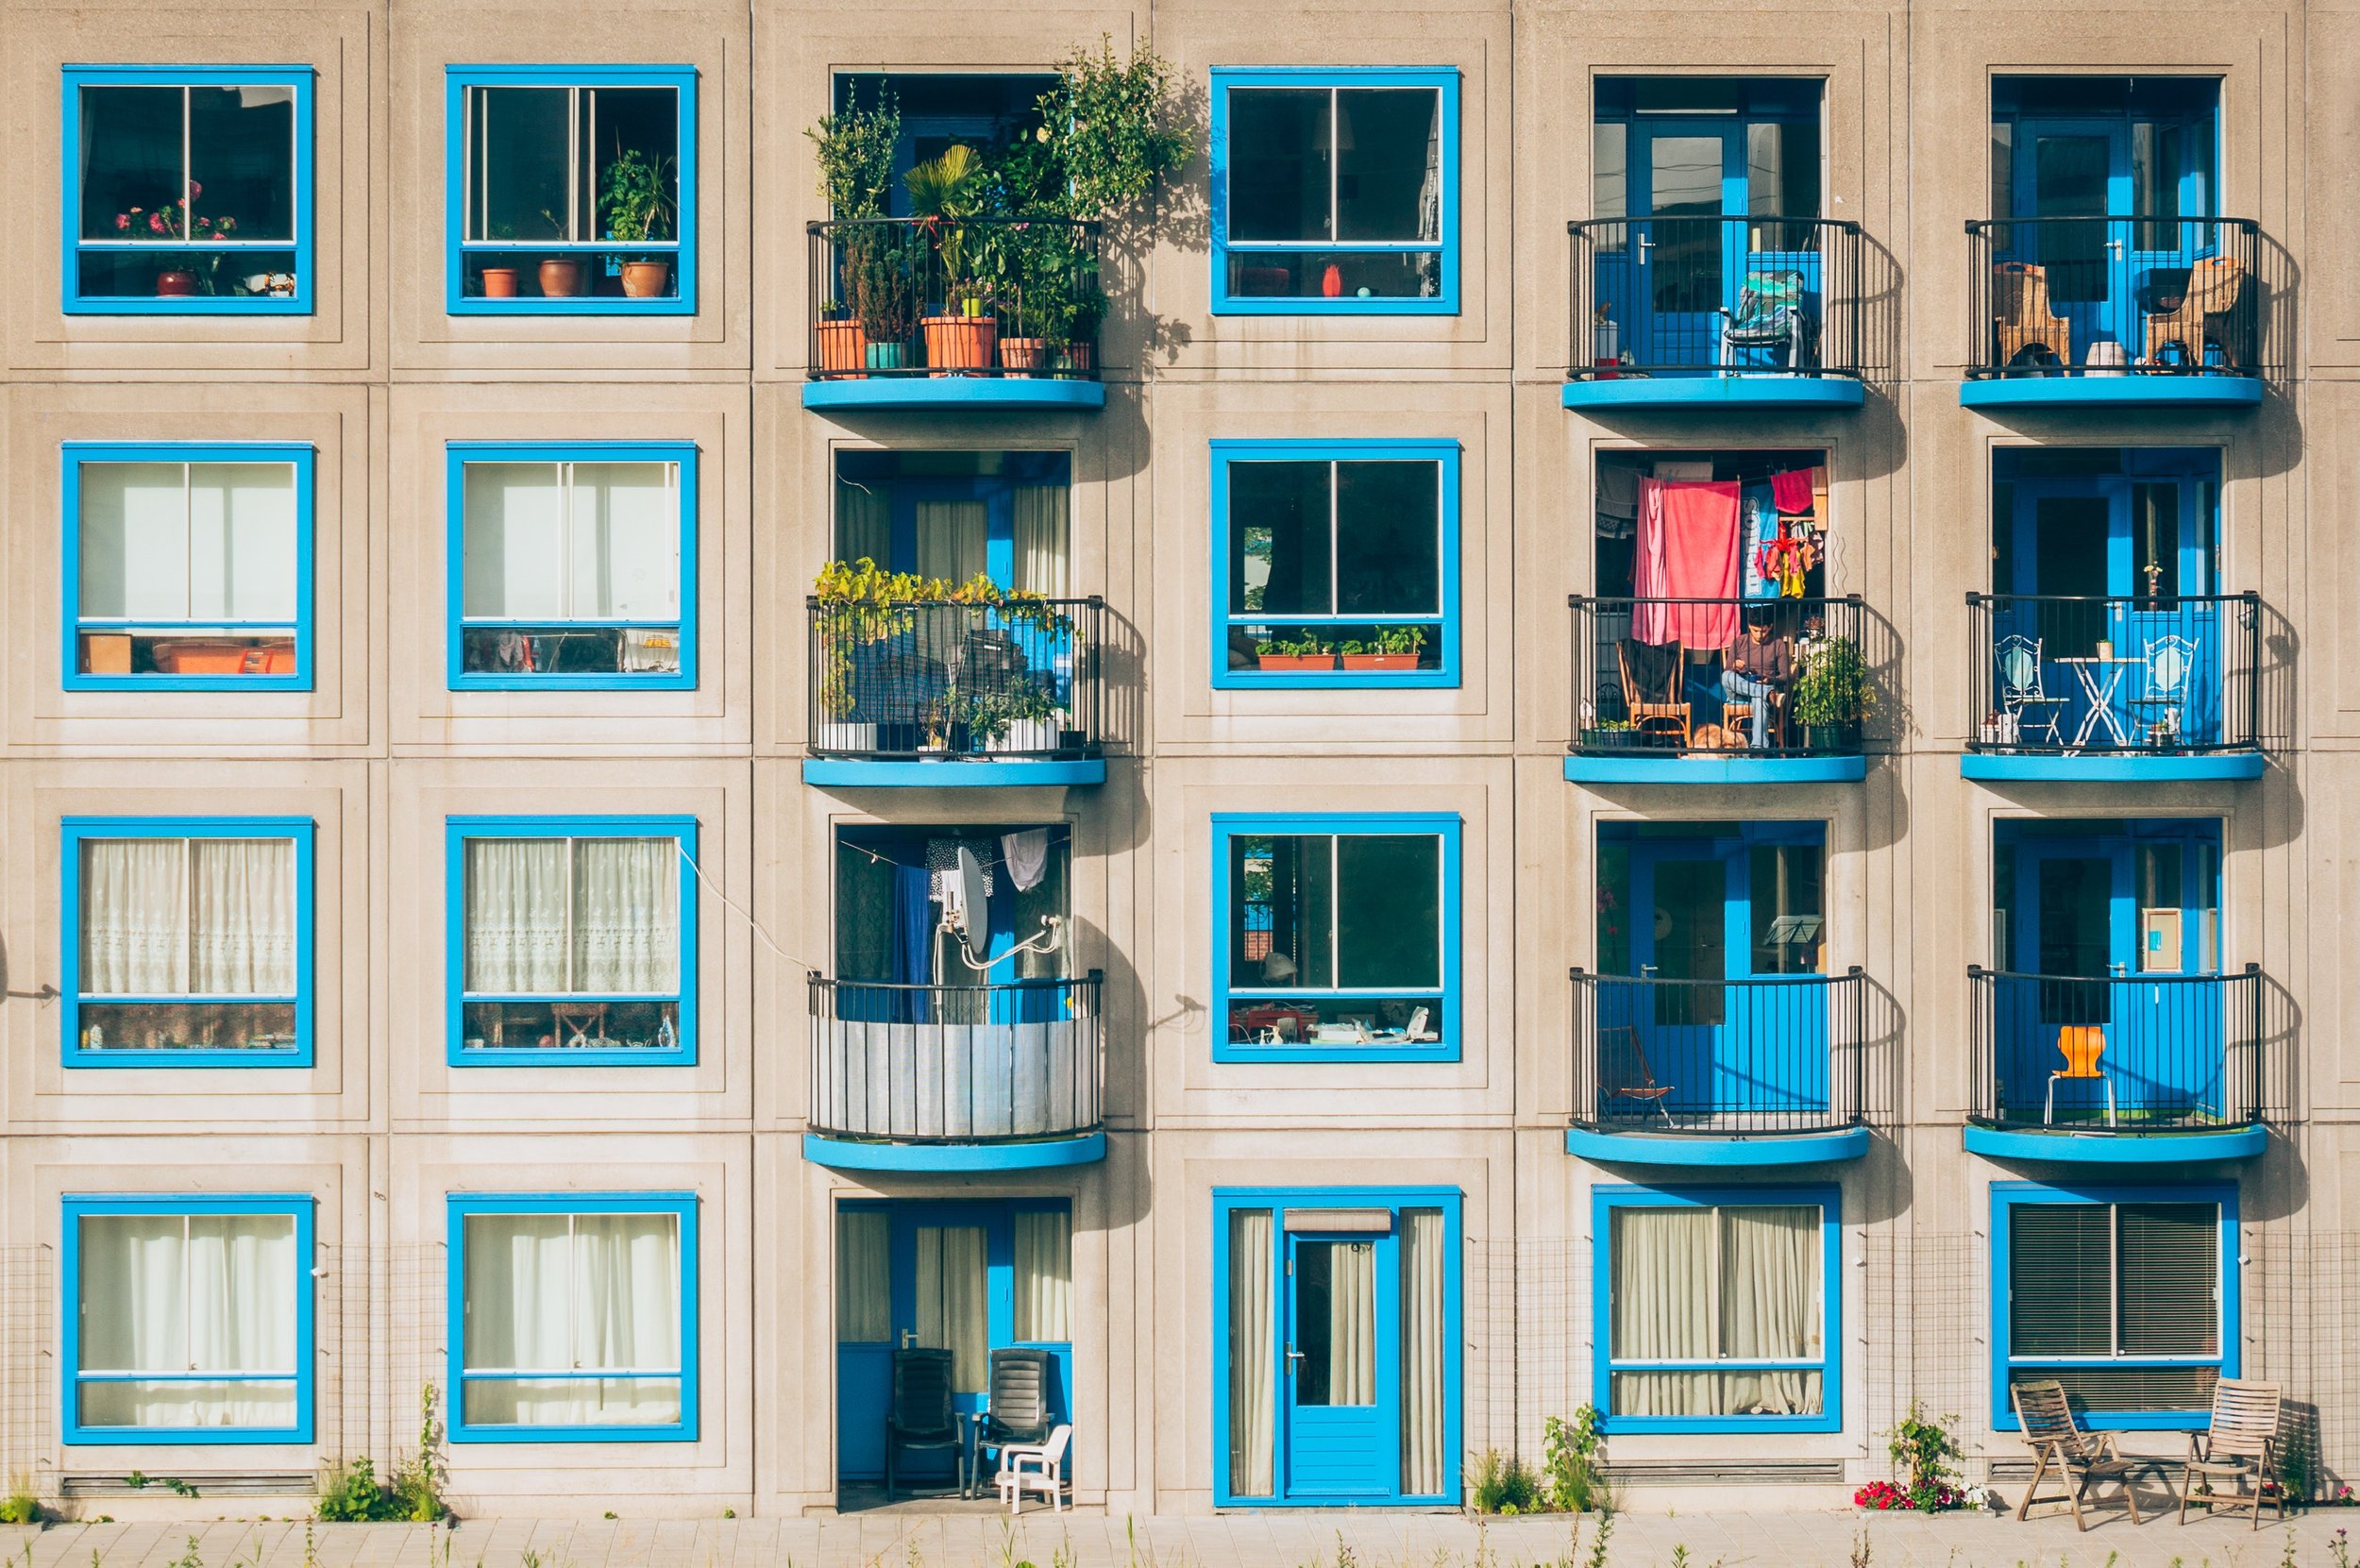 The 7 Questions You Need To Ask When Visiting An Apartment